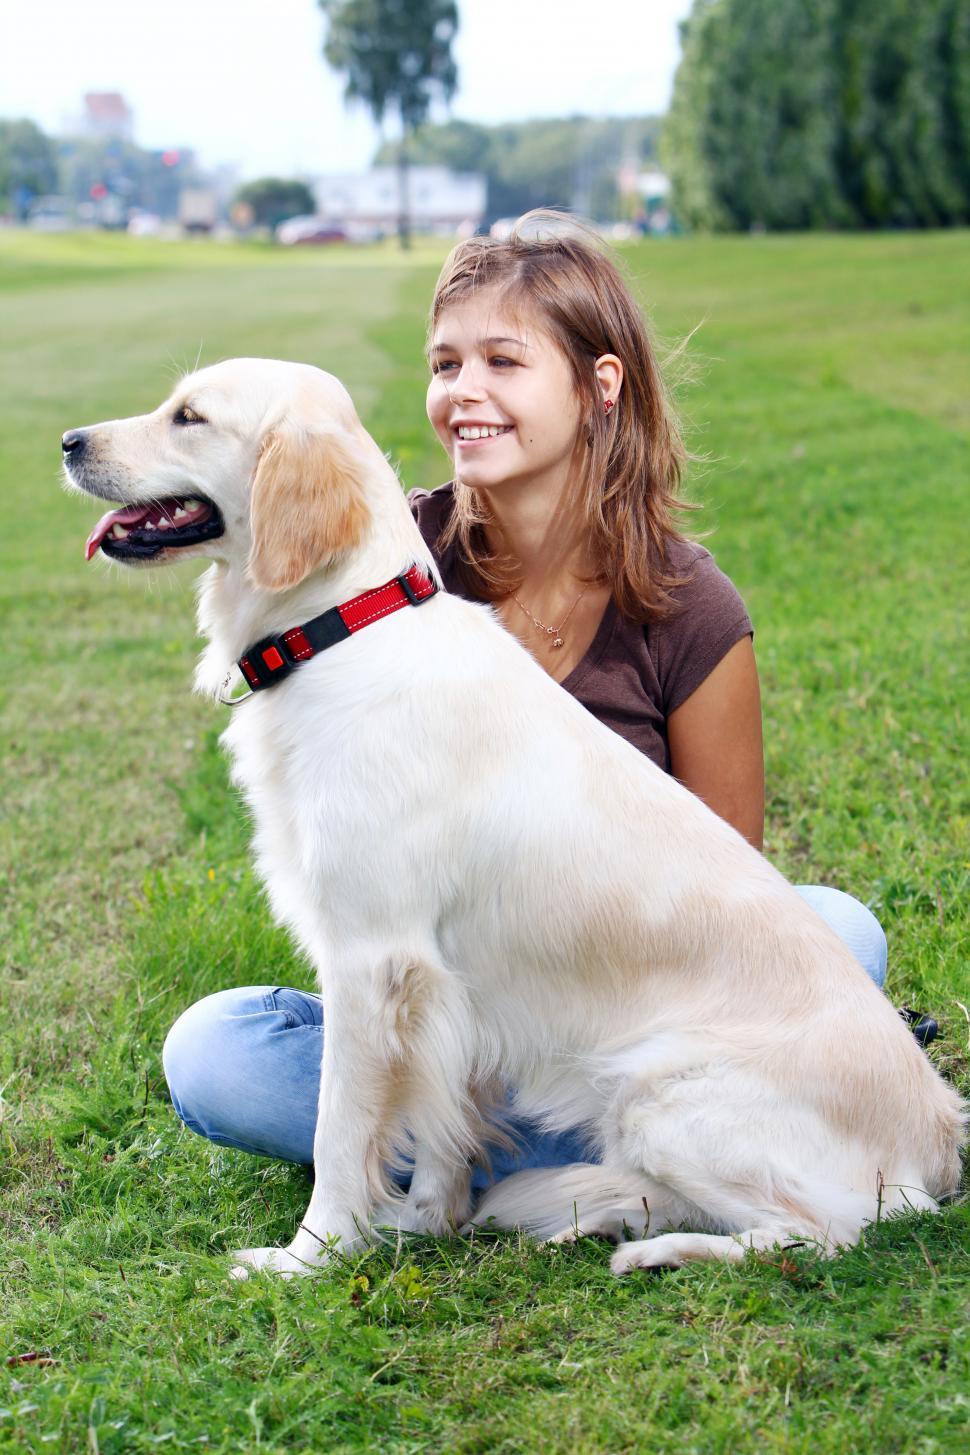 Free Image of Woman and a dog sitting together 